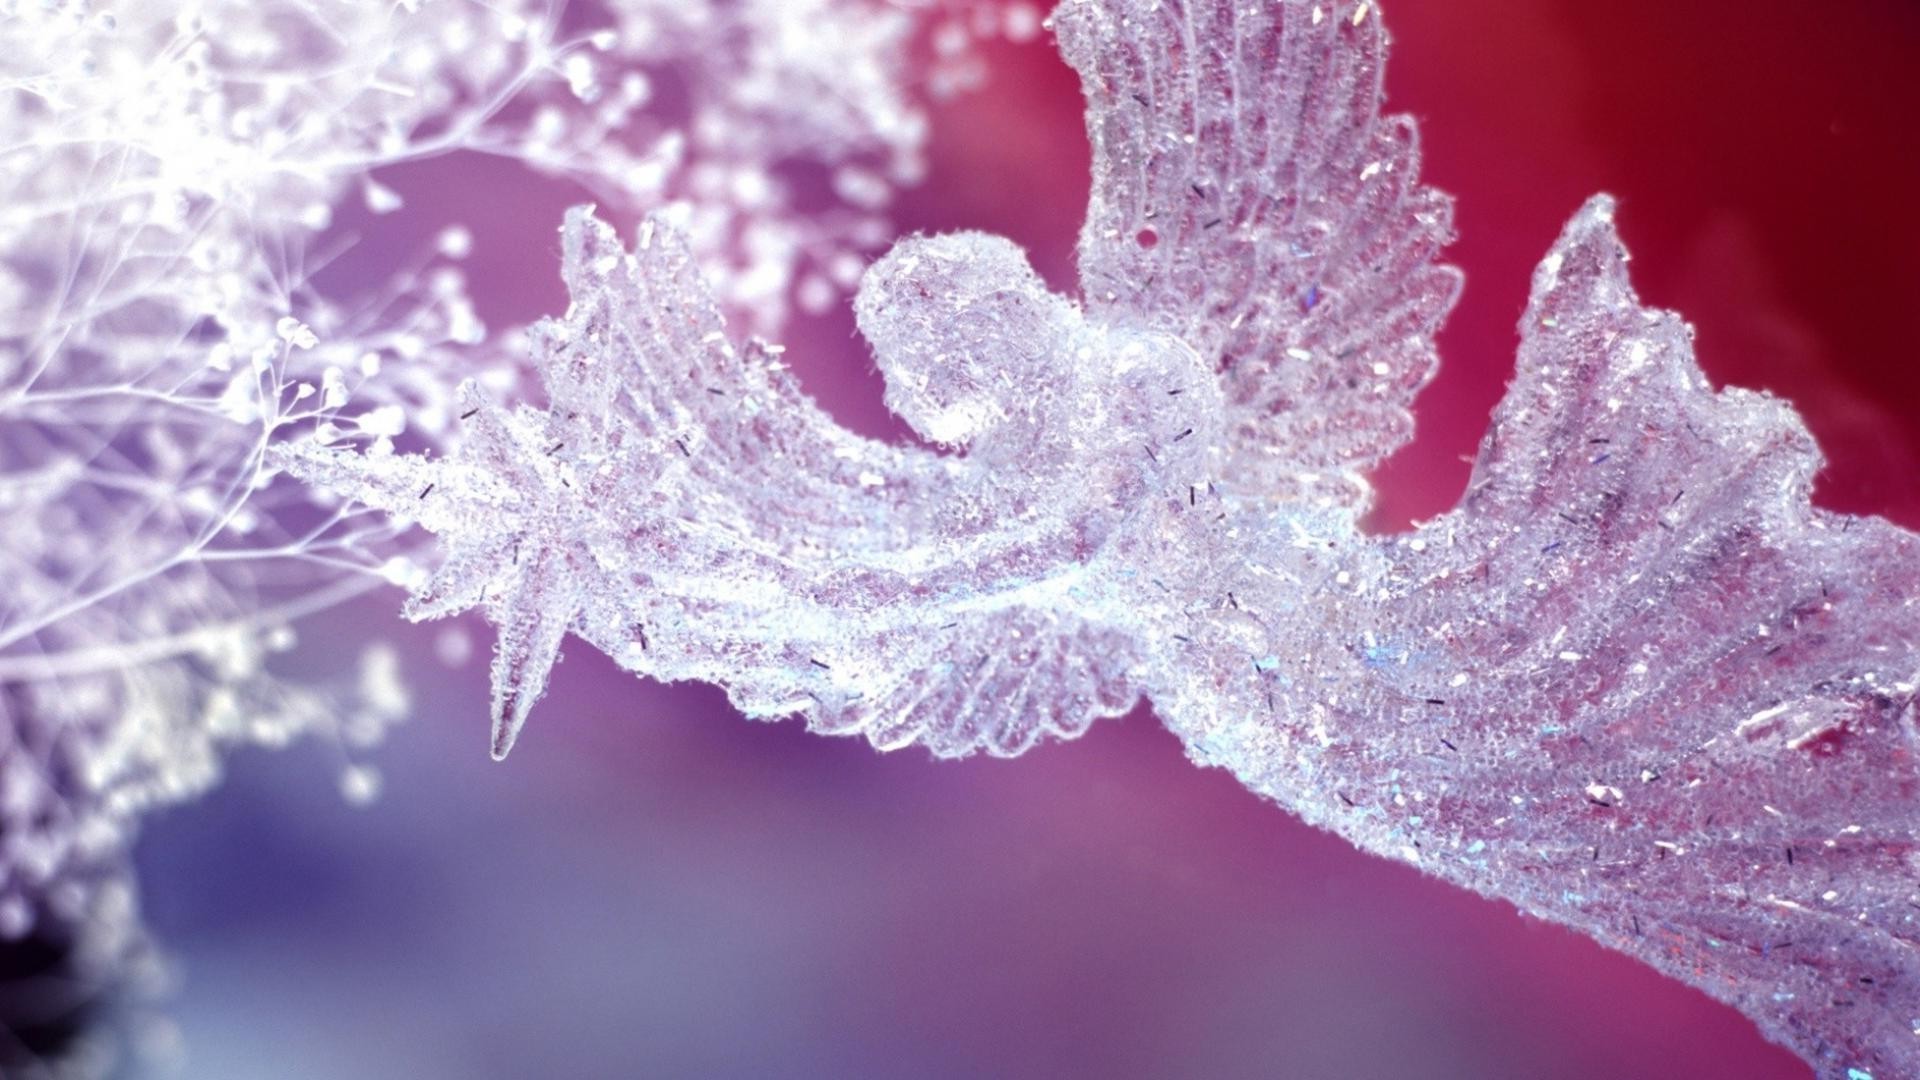 angels nature frost winter season flora desktop snow close-up flower crystal color outdoors bright cold christmas